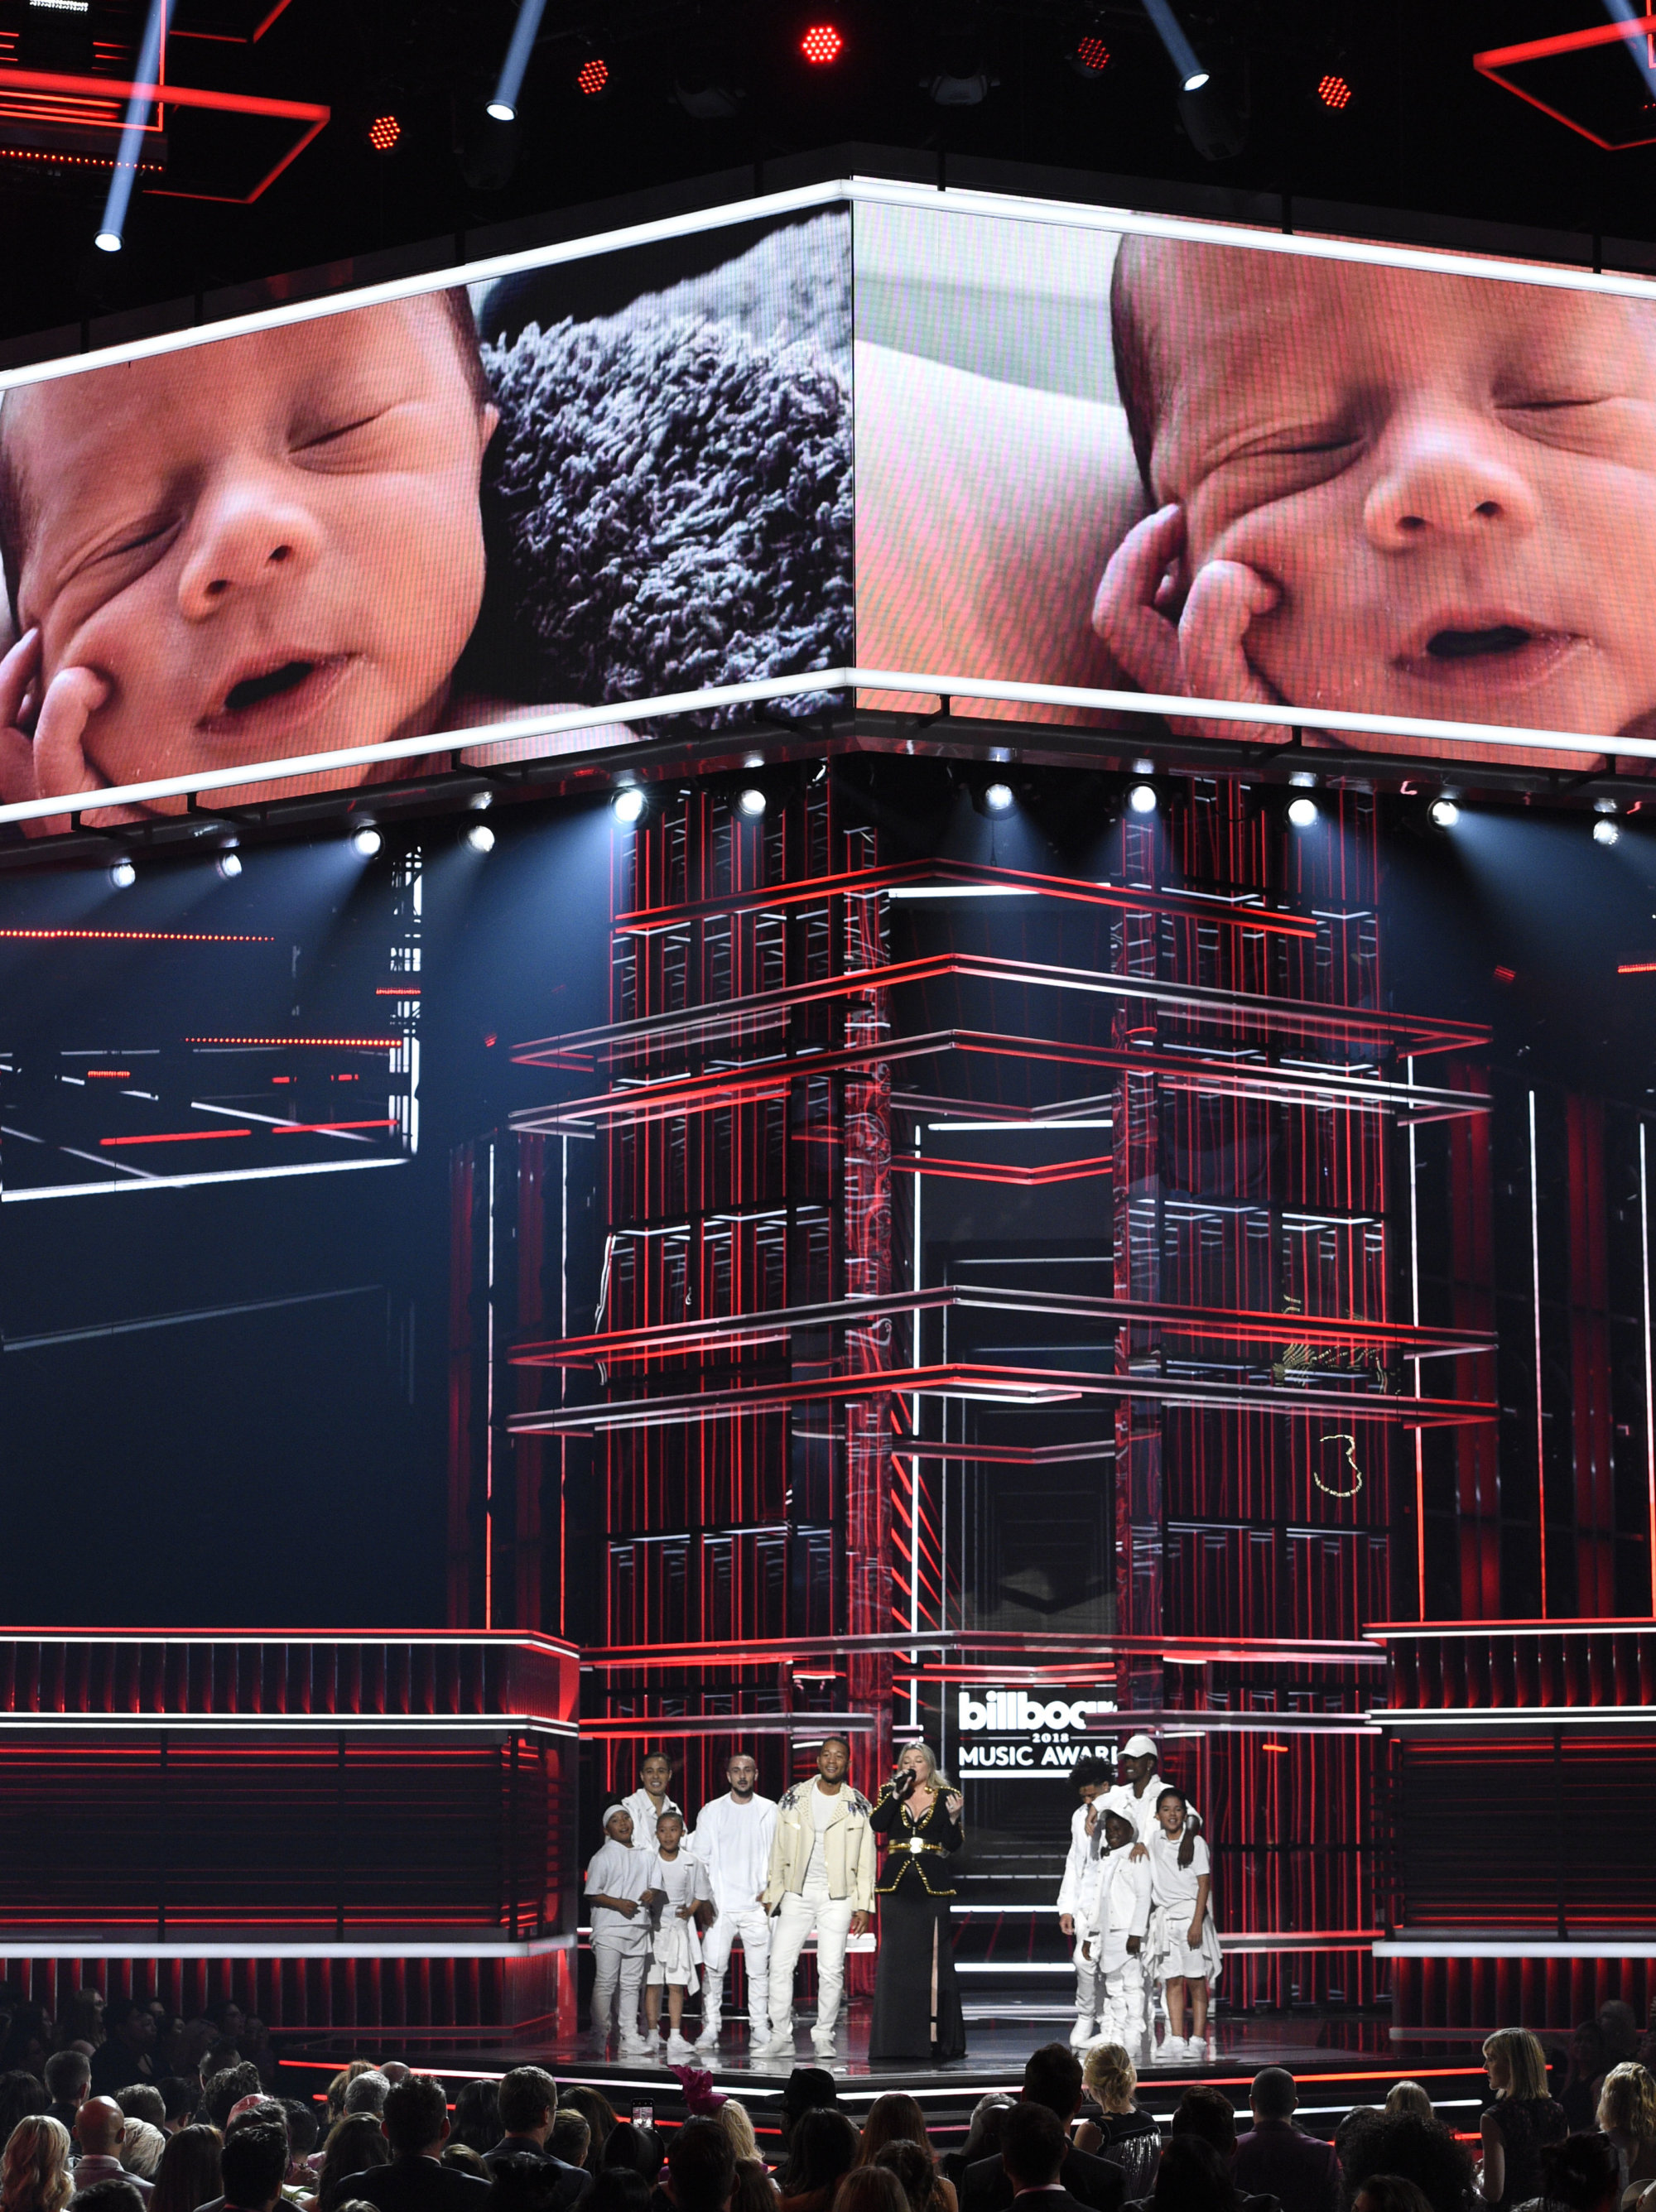 Host Kelly Clarkson congratulates John Legend on the birth of his son Miles Theodore, pictured on screen, at the Billboard Music Awards at the MGM Grand Garden Arena on Sunday, May 20, 2018, in Las Vegas. (Photo by Chris Pizzello/Invision/AP)